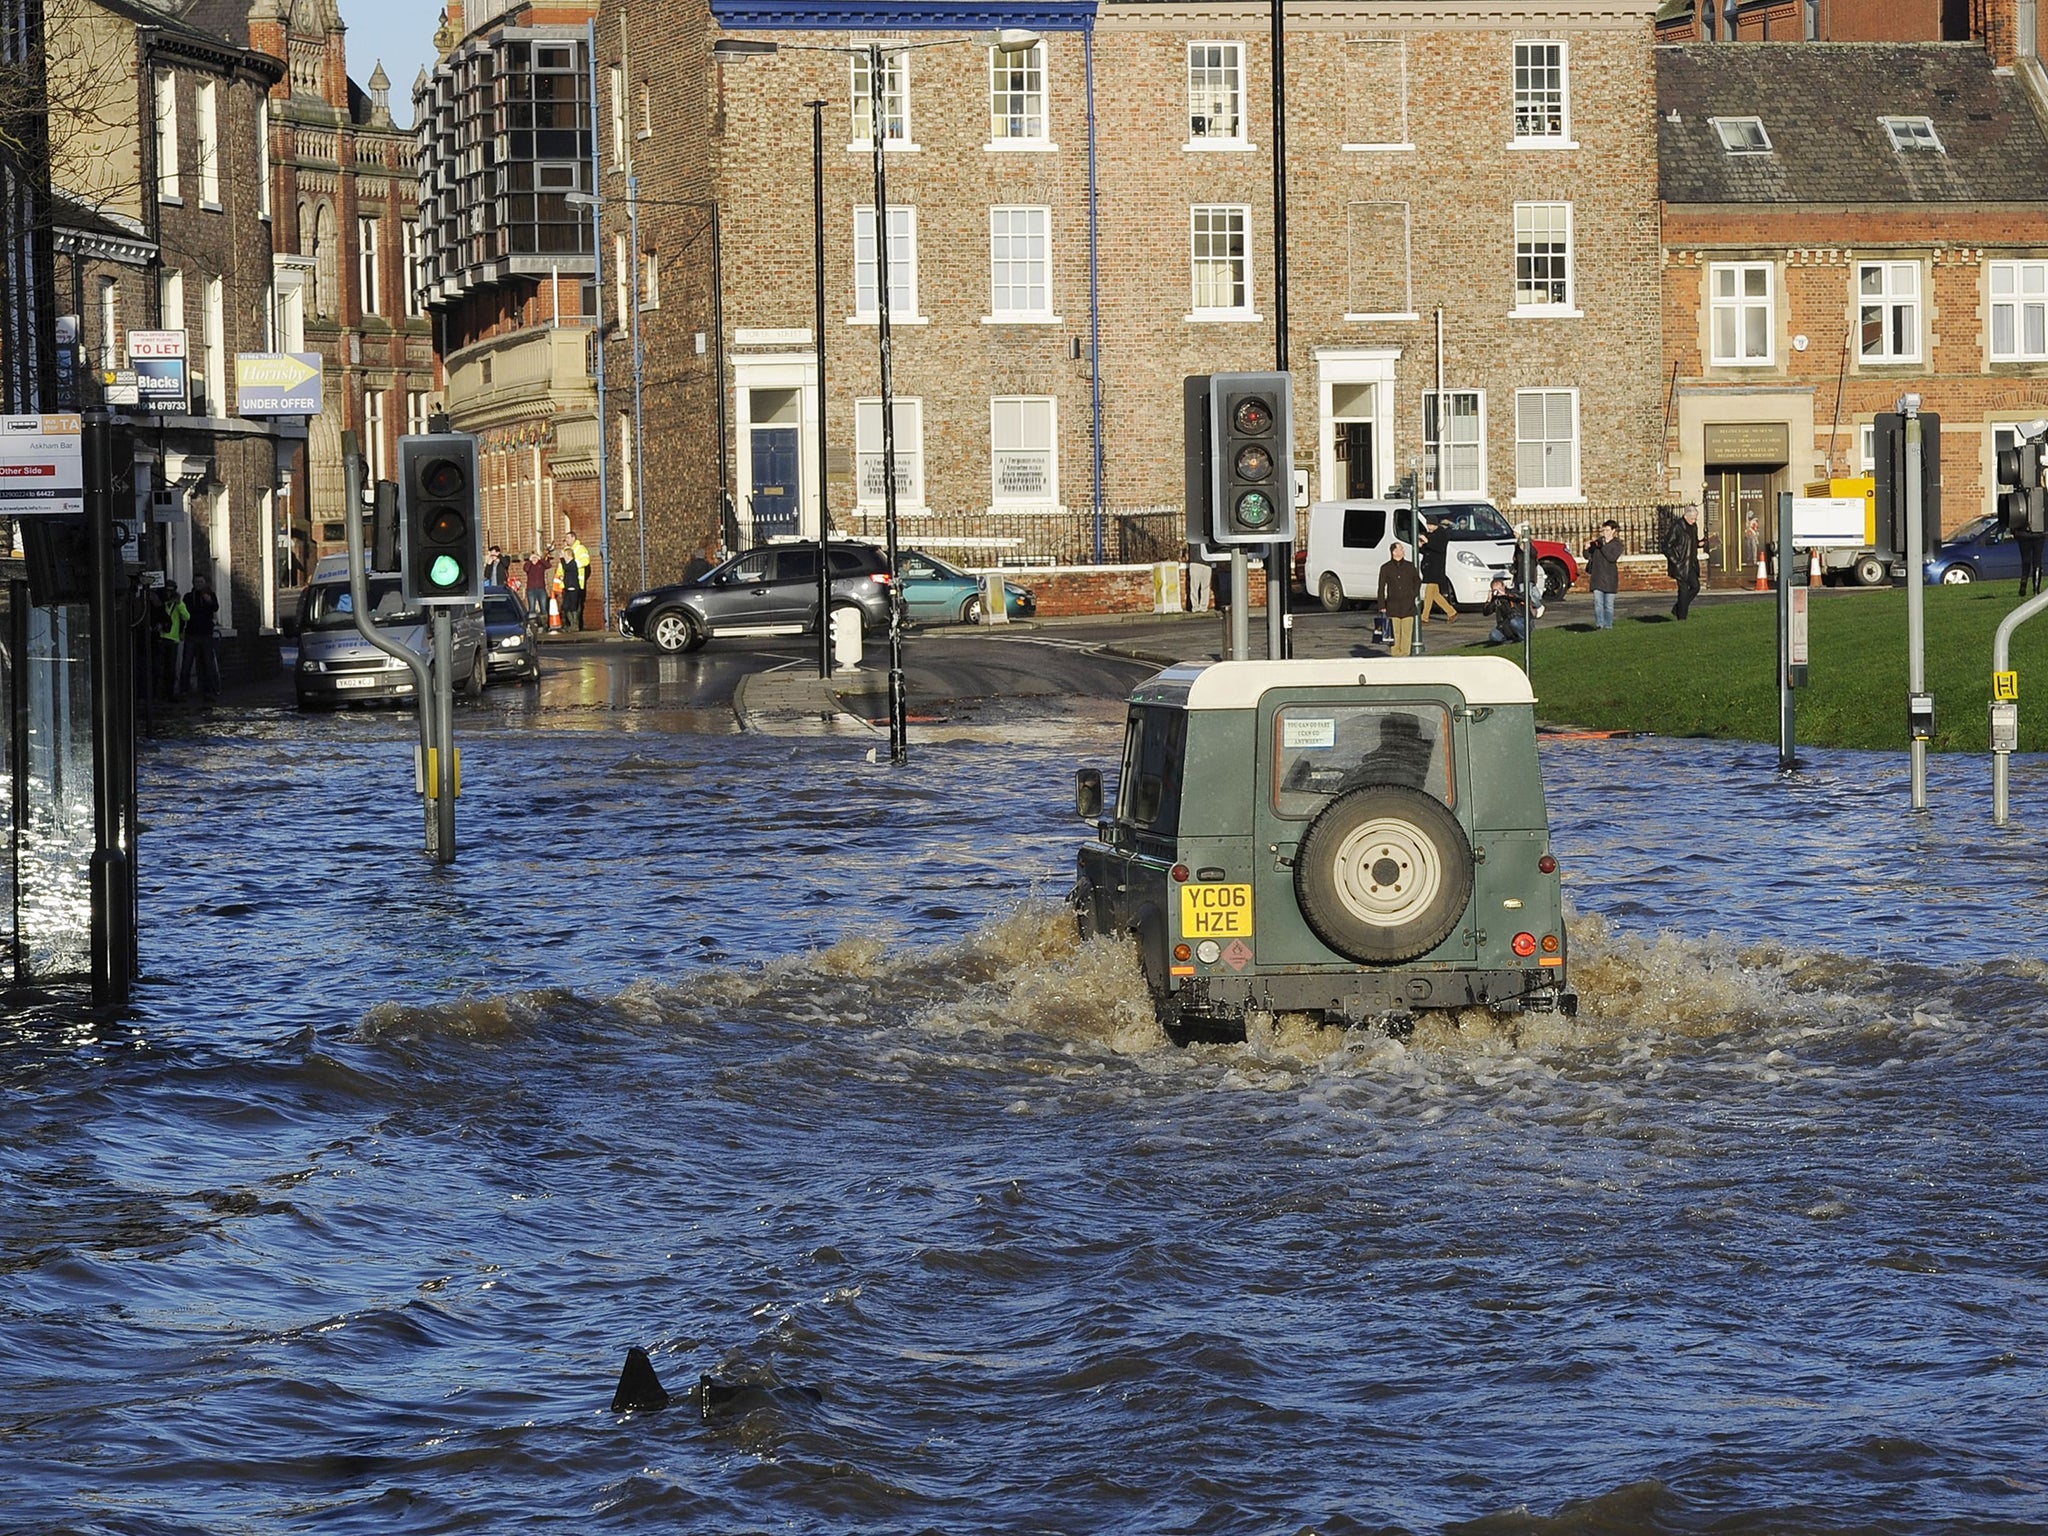 A Land Rover is driven through floodwater in York city centre, after the River Ouse and the River Foss burst their banks.